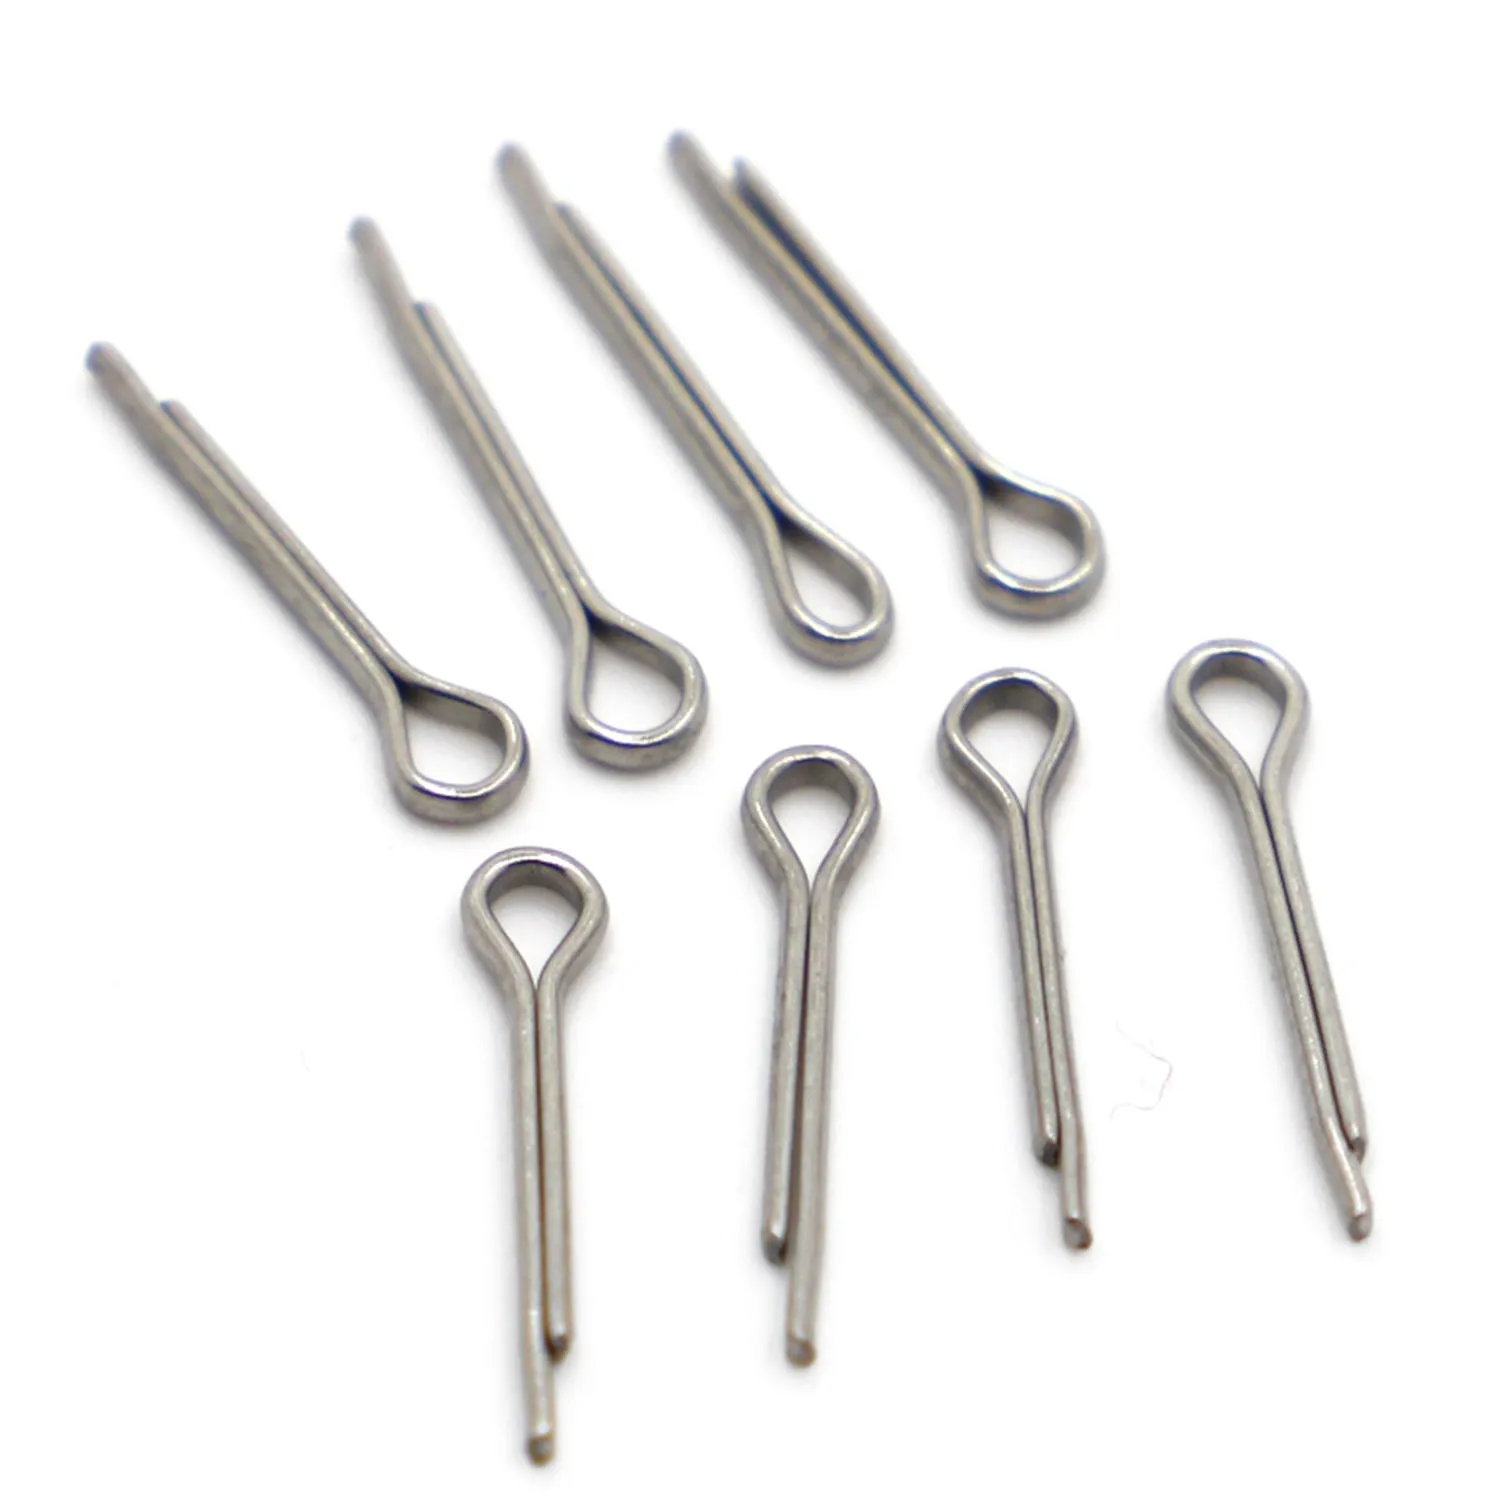 Sporting Stainless Steel U Shape Type Spring Cotter Hair Pin M1 M1.2 M1.5 M2 M3  - £18.48 GBP